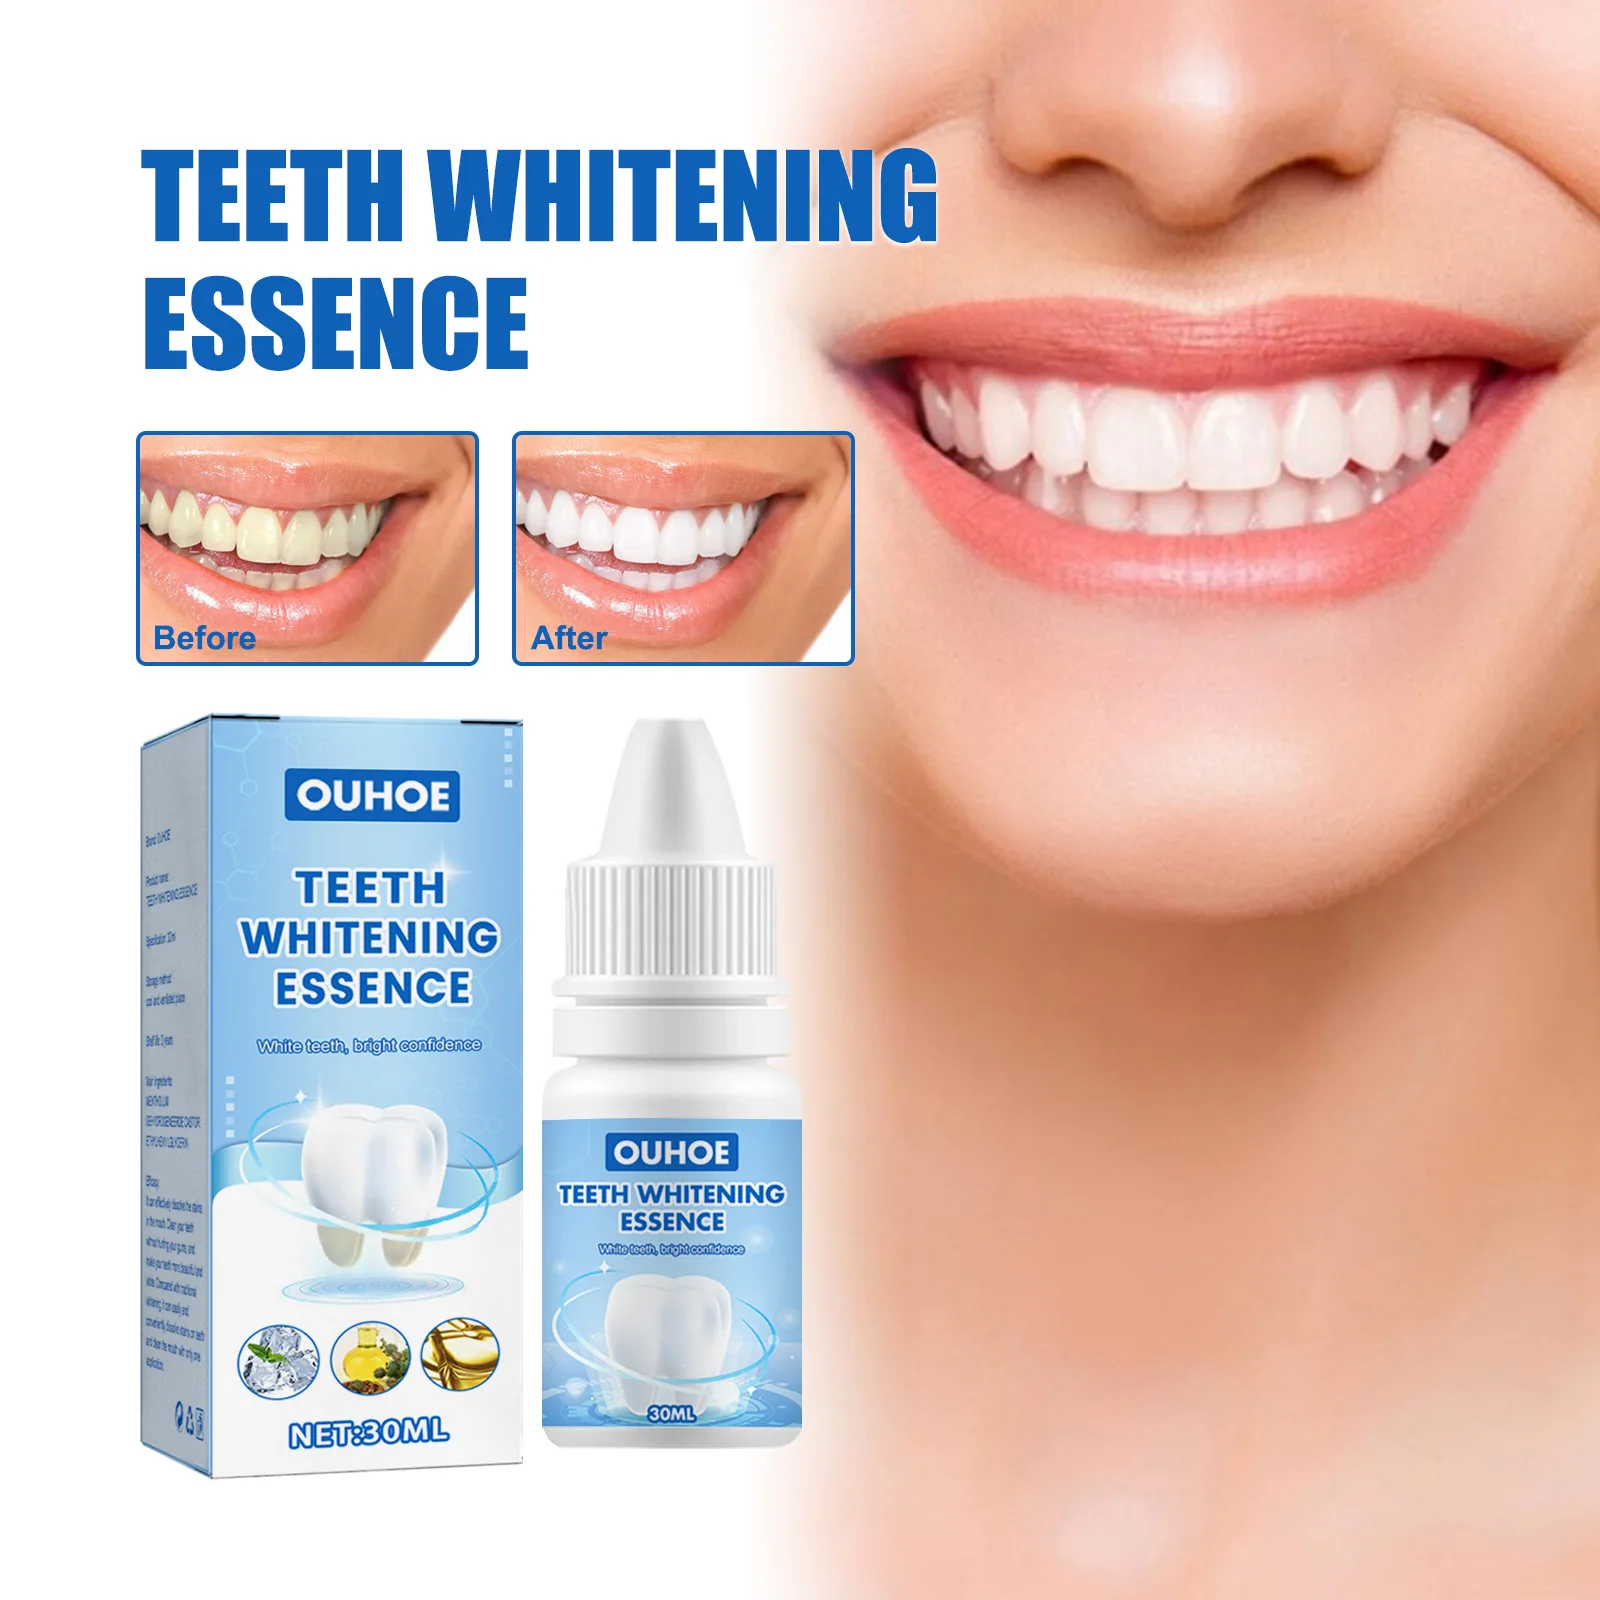 

30ml Teeth Whitening Essence Liqud Oral Hygiene Cleaning Whiten Tooth Serum Remove Oral Odor Plaque Dental Bleach Care Tools